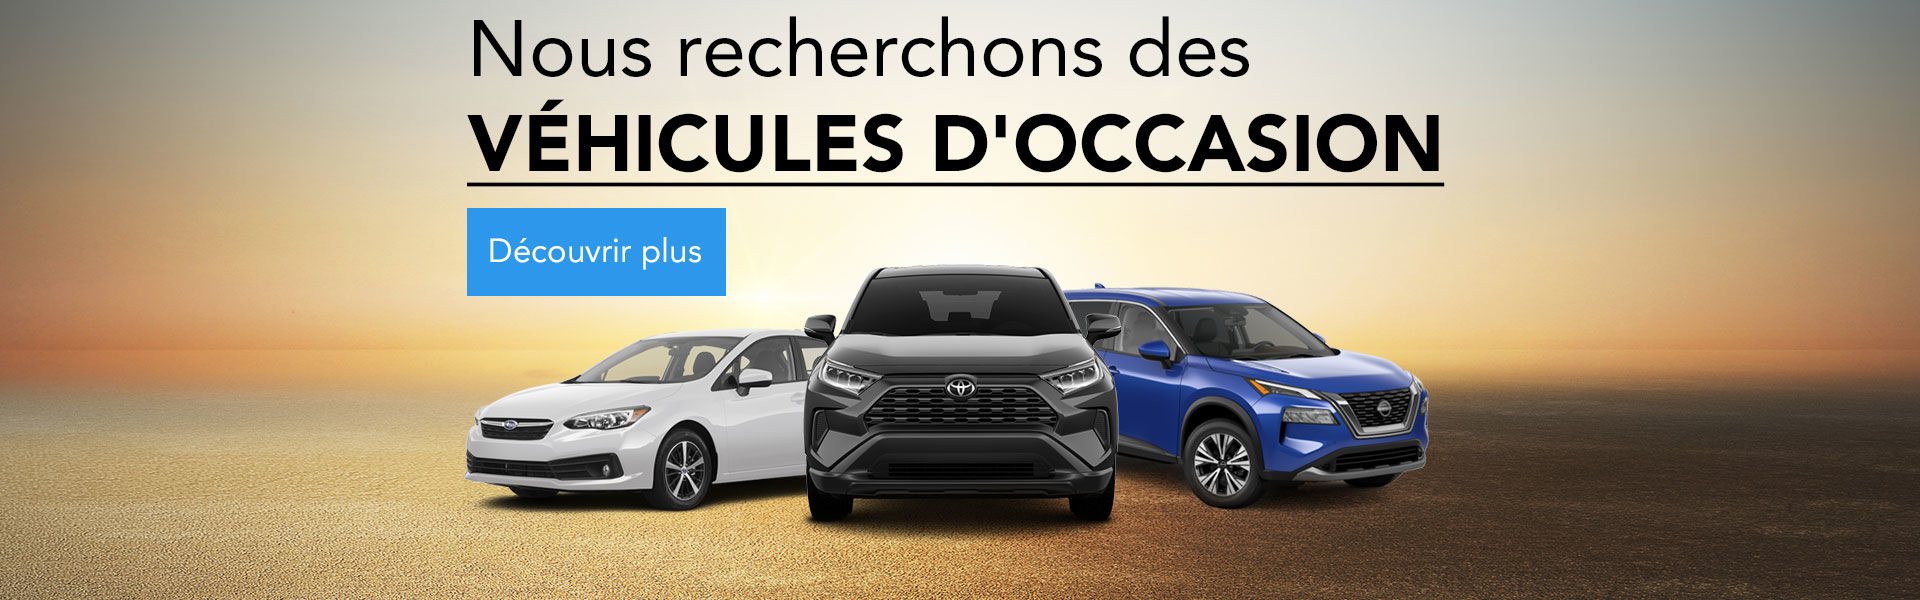 Vehicules d'occasion